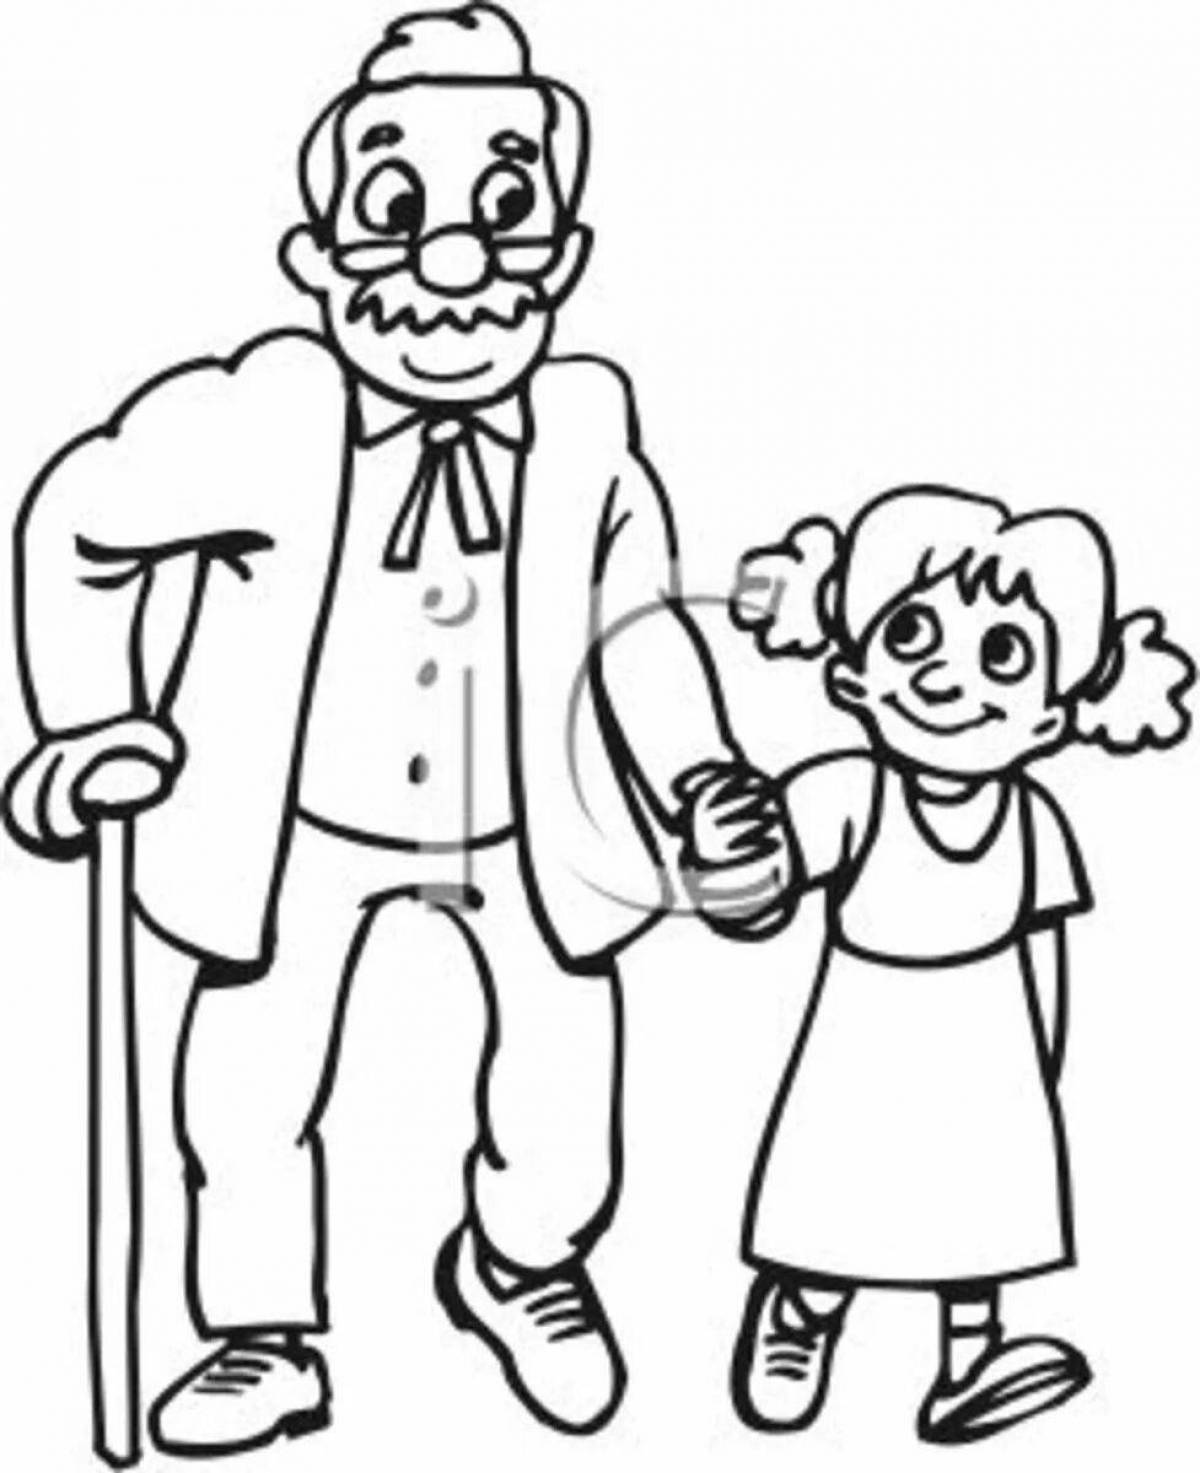 Amazing grandfather and granddaughter coloring book